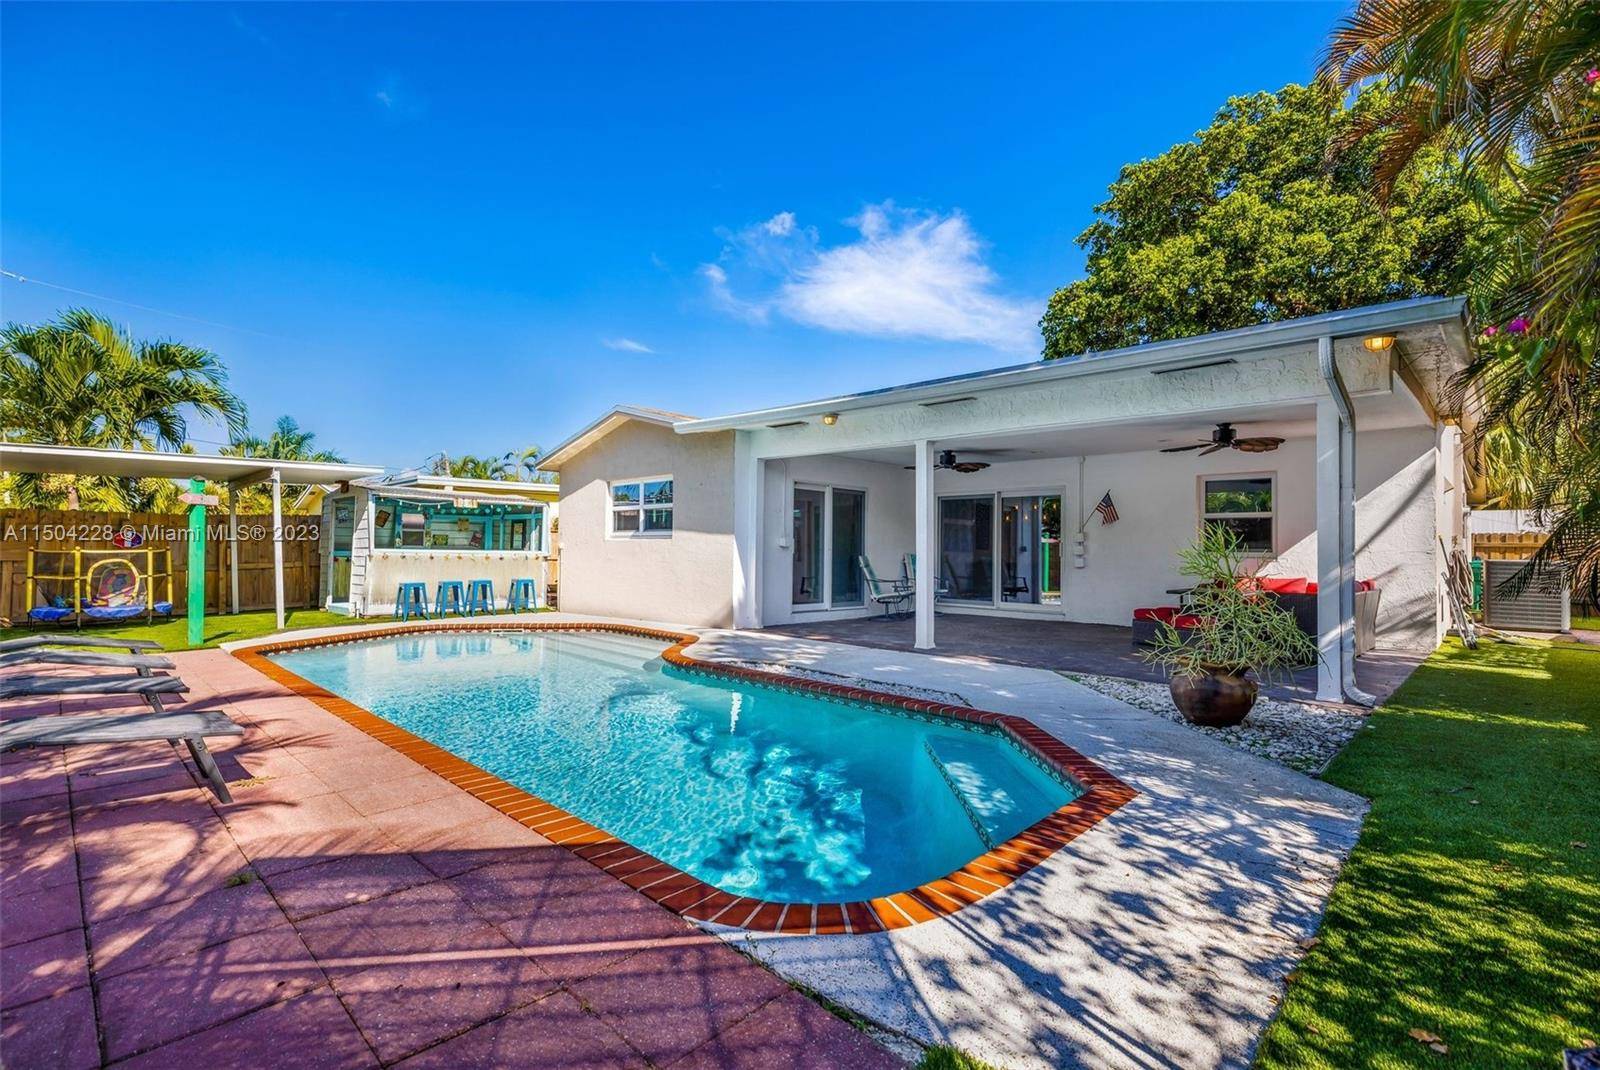 Step inside this beautiful 4 bedroom, 2 bathroon modern sanctuary in the highly desirable Dania Beach area.